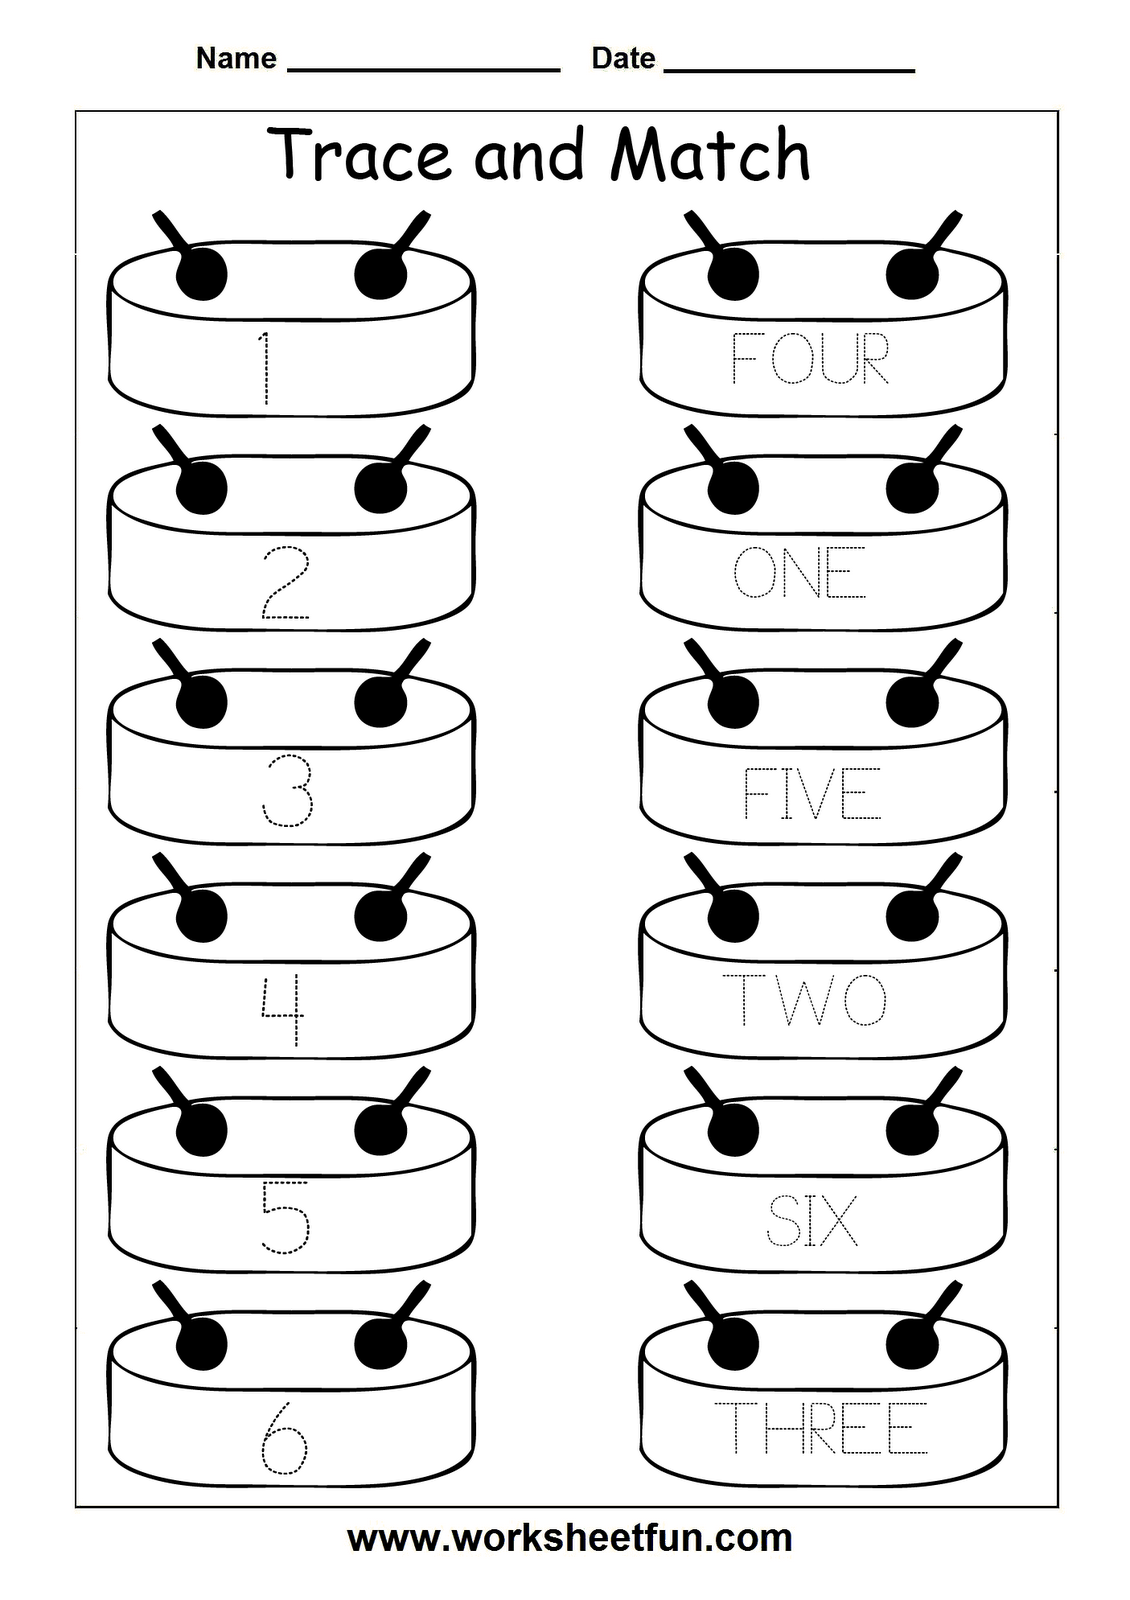 15 Best Images of Matching Numbers 1 10 Worksheets - Math Number